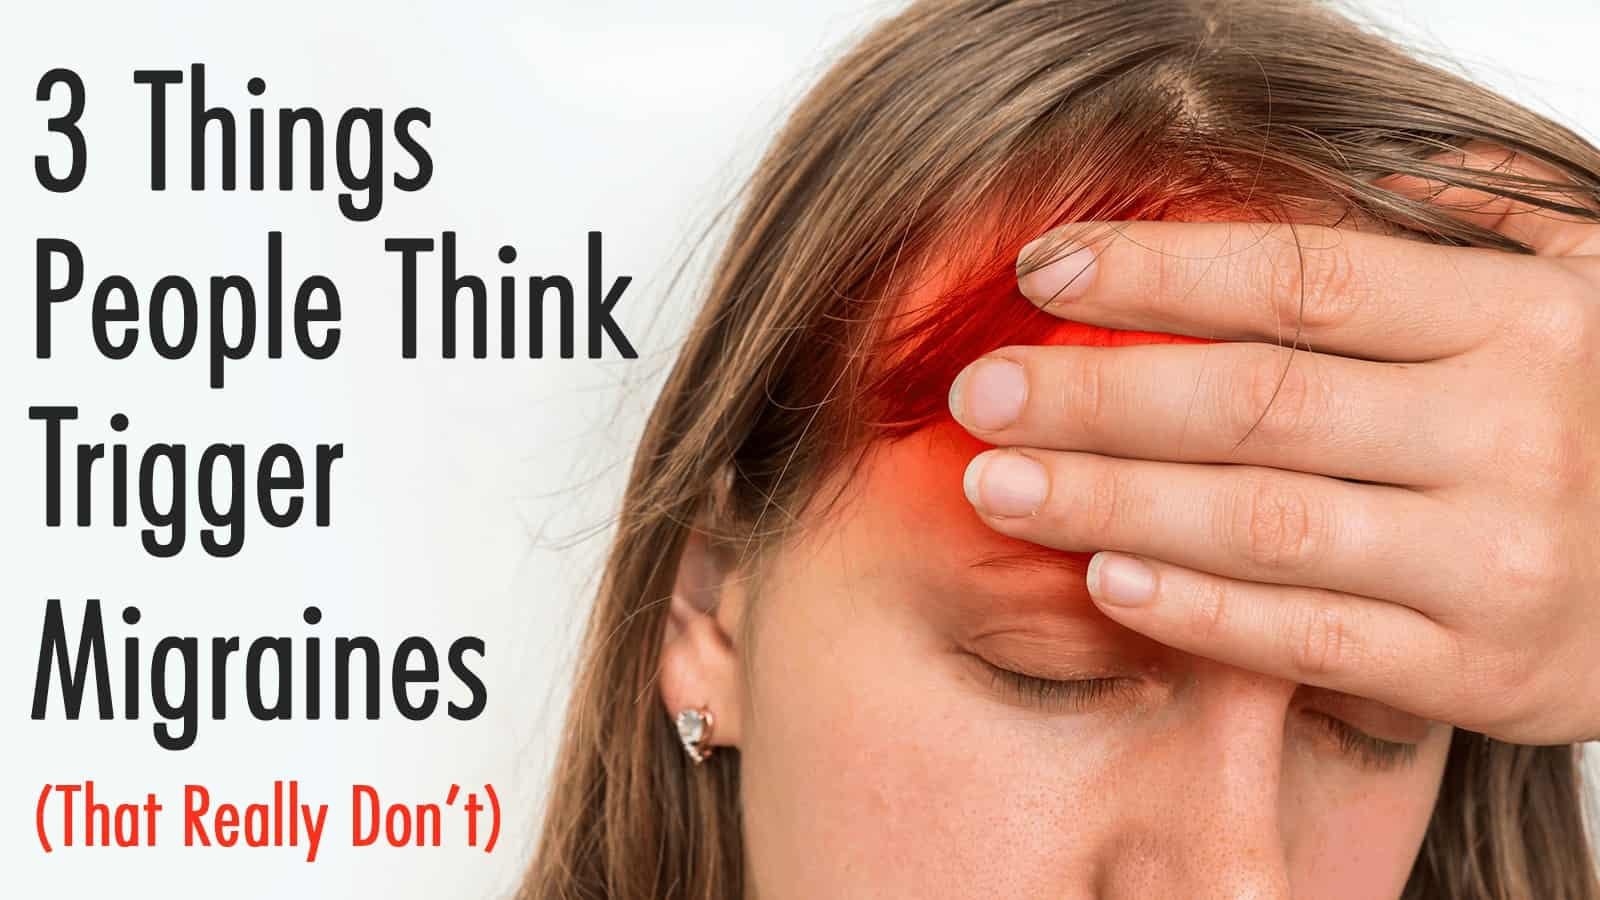 3 Things People Think Trigger Migraines (That Really Don't)